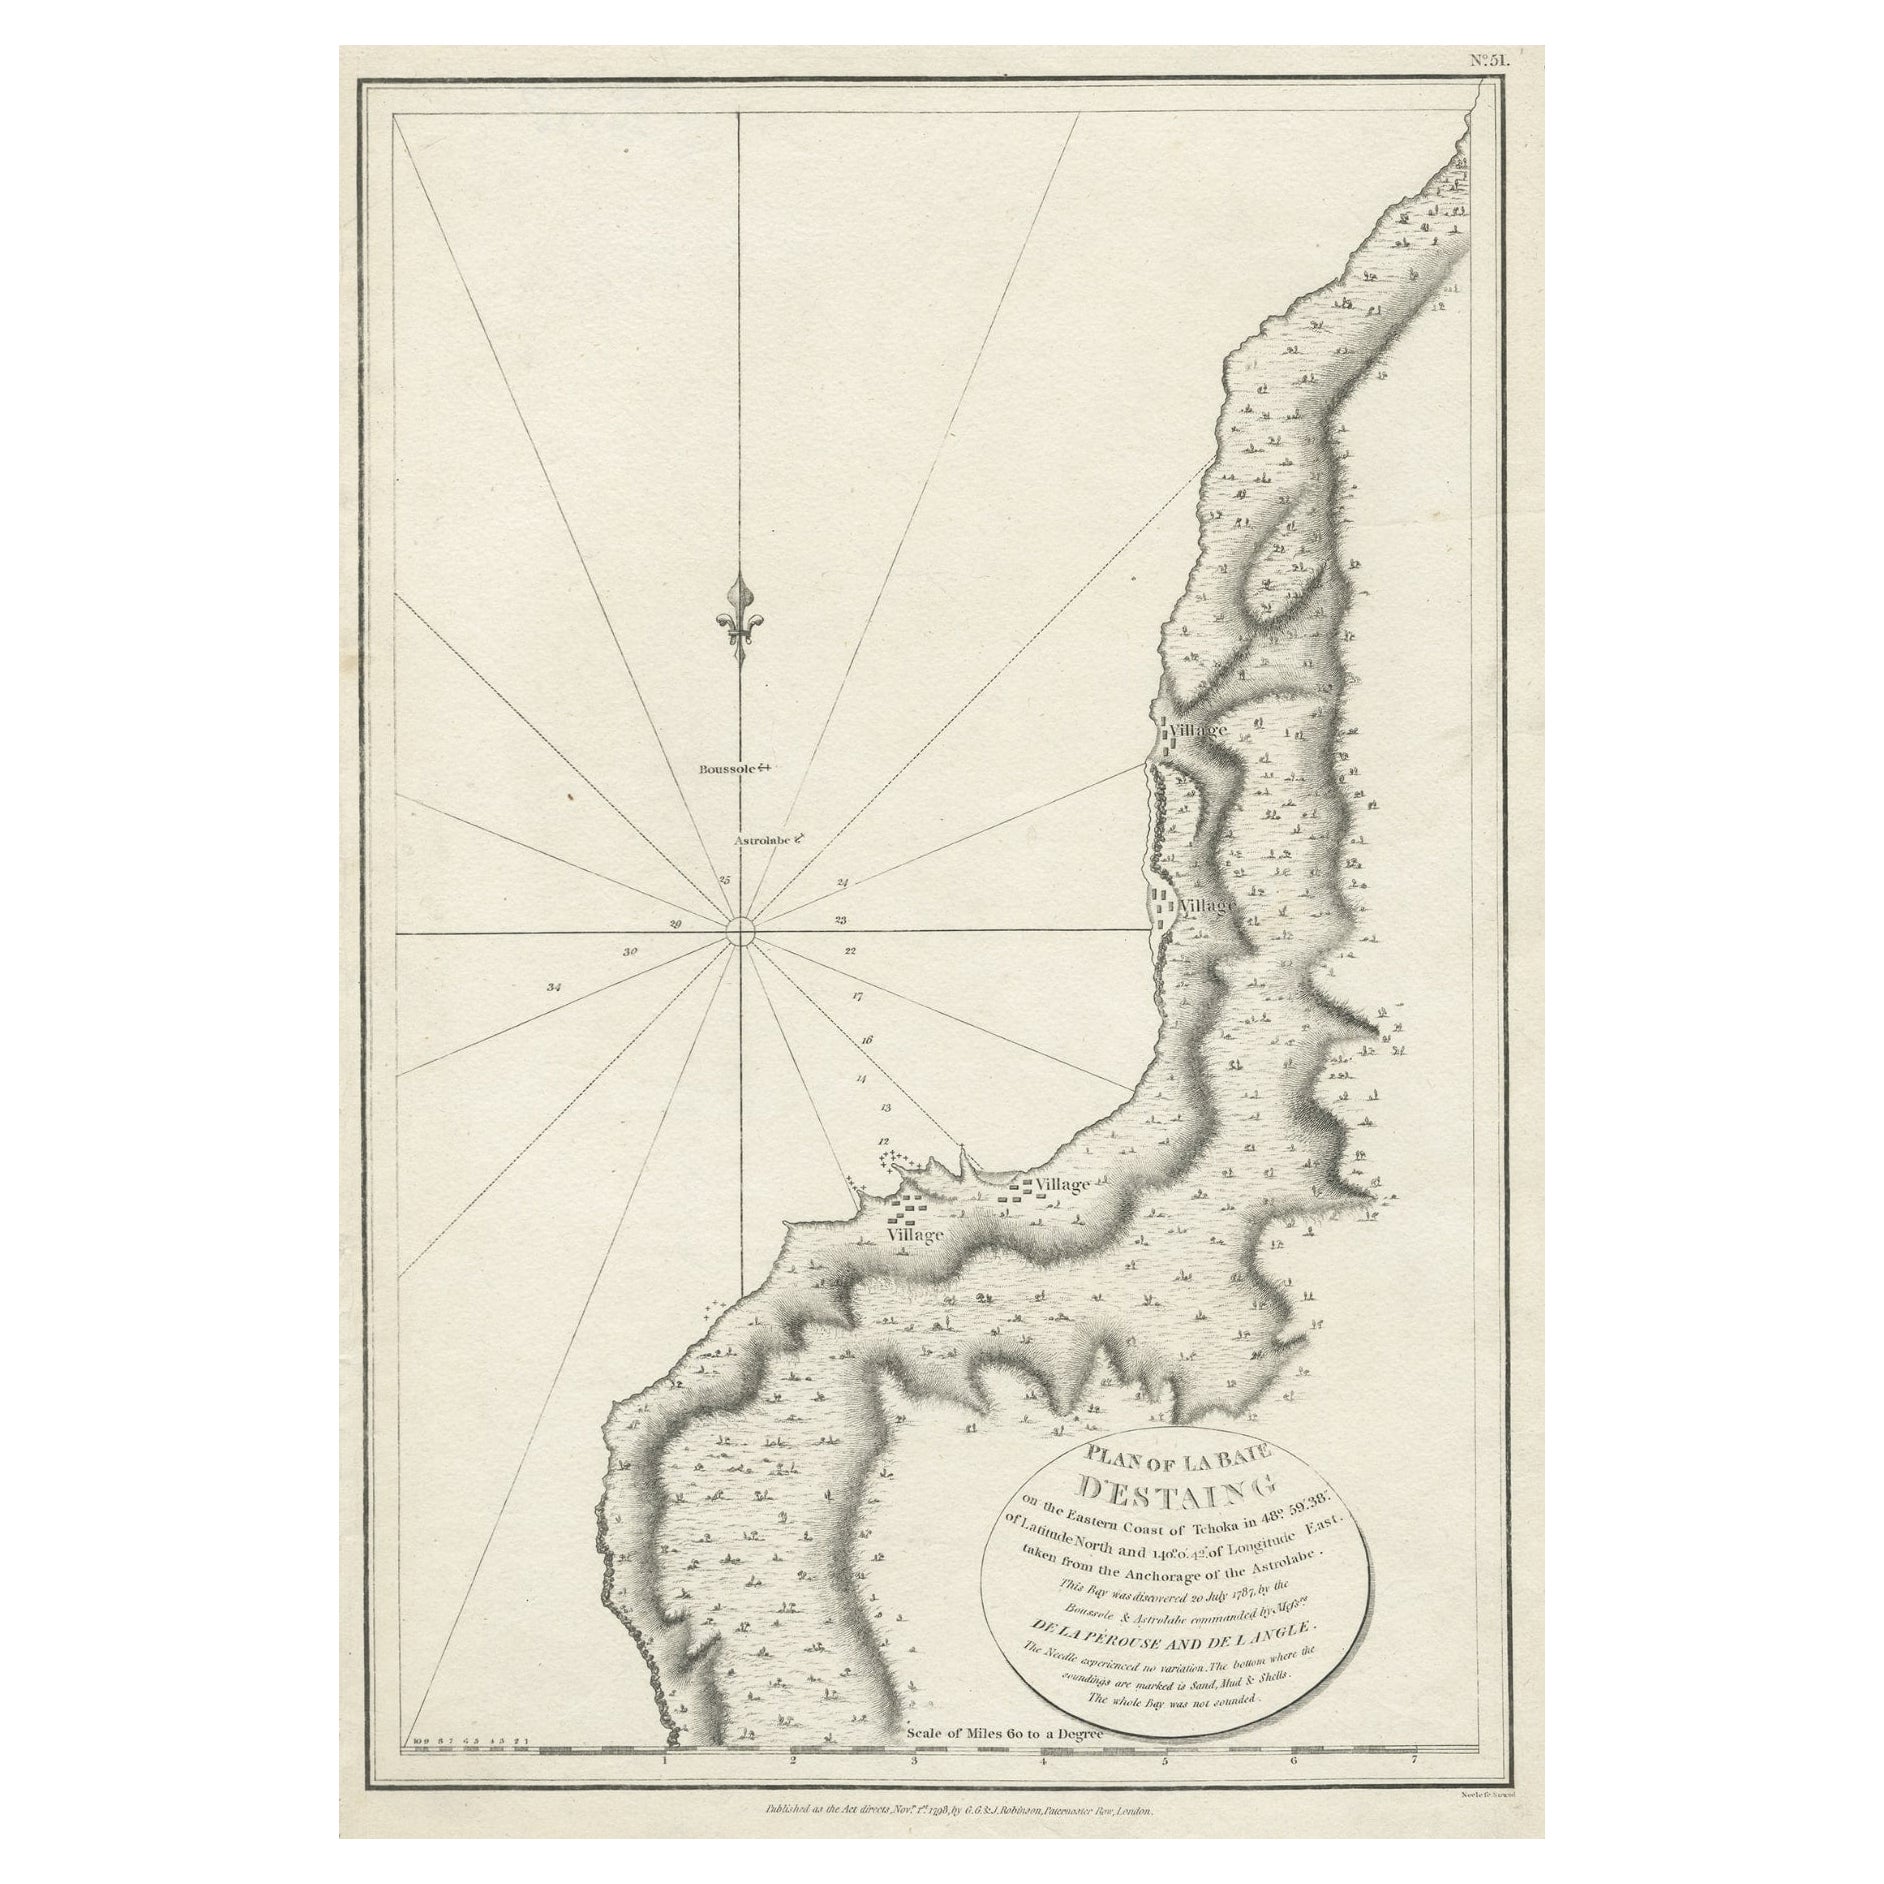 Antique Map of The Bay of D'Estaing located on the Russian island Sakhalin, 1798